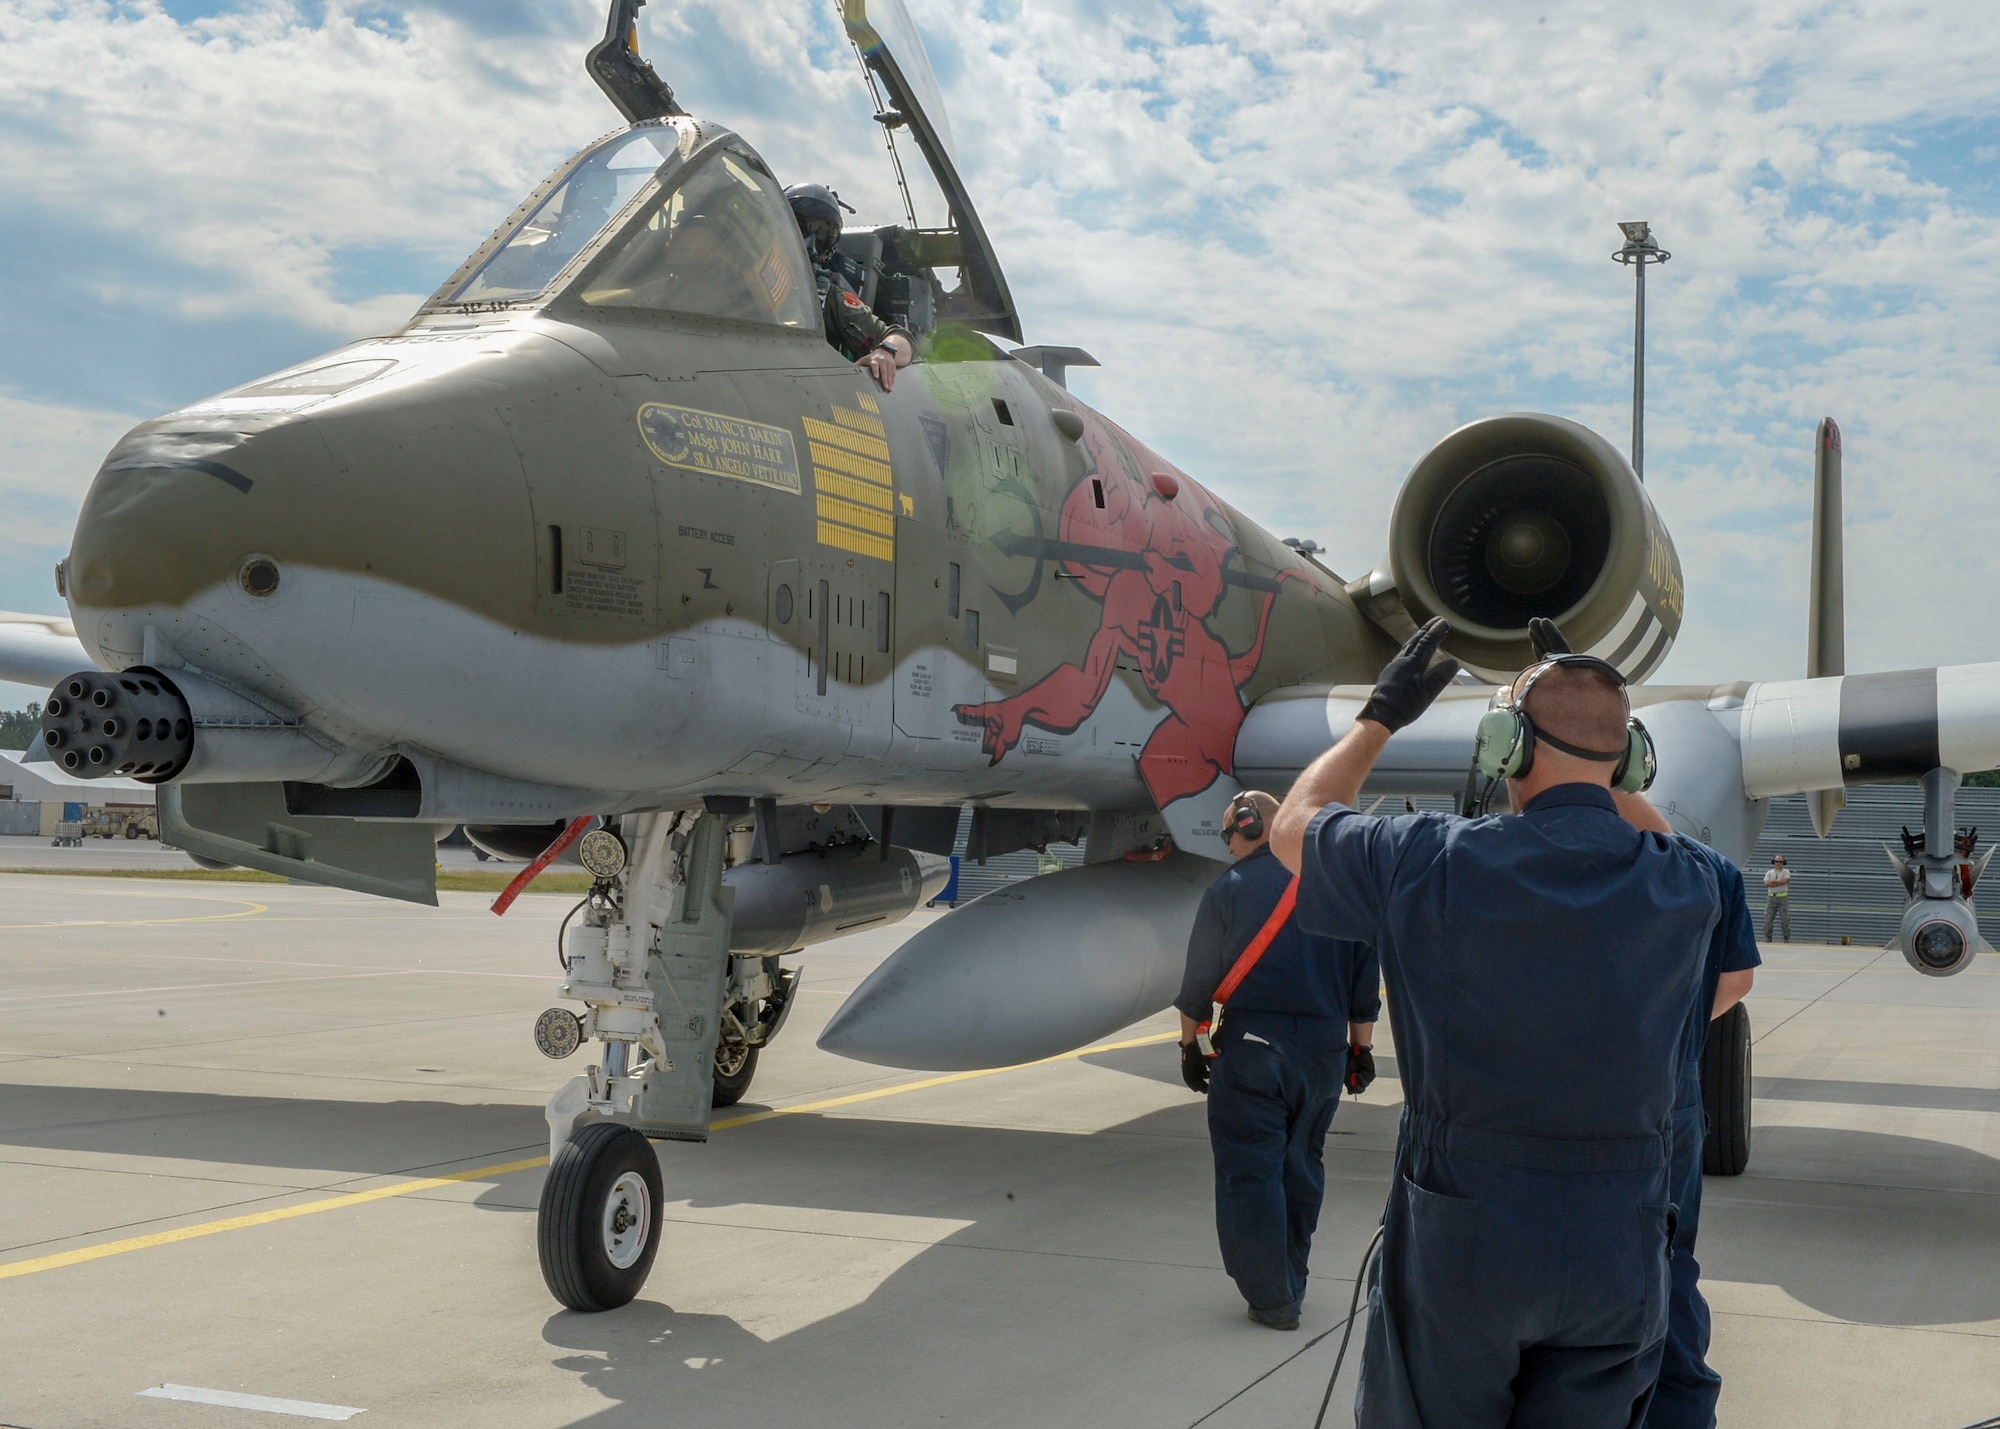 A maintainer directs an A-10 Thunderbolt II pilot to a designated spot on the flight line at Lielvarde Air Base, Latvia, June 4, 2018. A-10s were deployed to Europe from the 127th Wing at Selfridge Air National Guard Base, Michigan, to support exercise Saber Strike 18. While flying, A-10 pilots worked on close air support tactics and communication with Joint Terminal Attack Controllers to combine air and land capabilities for U.S. and partnered nations. (U.S. Air Force photo by Staff Sgt. Jimmie D. Pike)